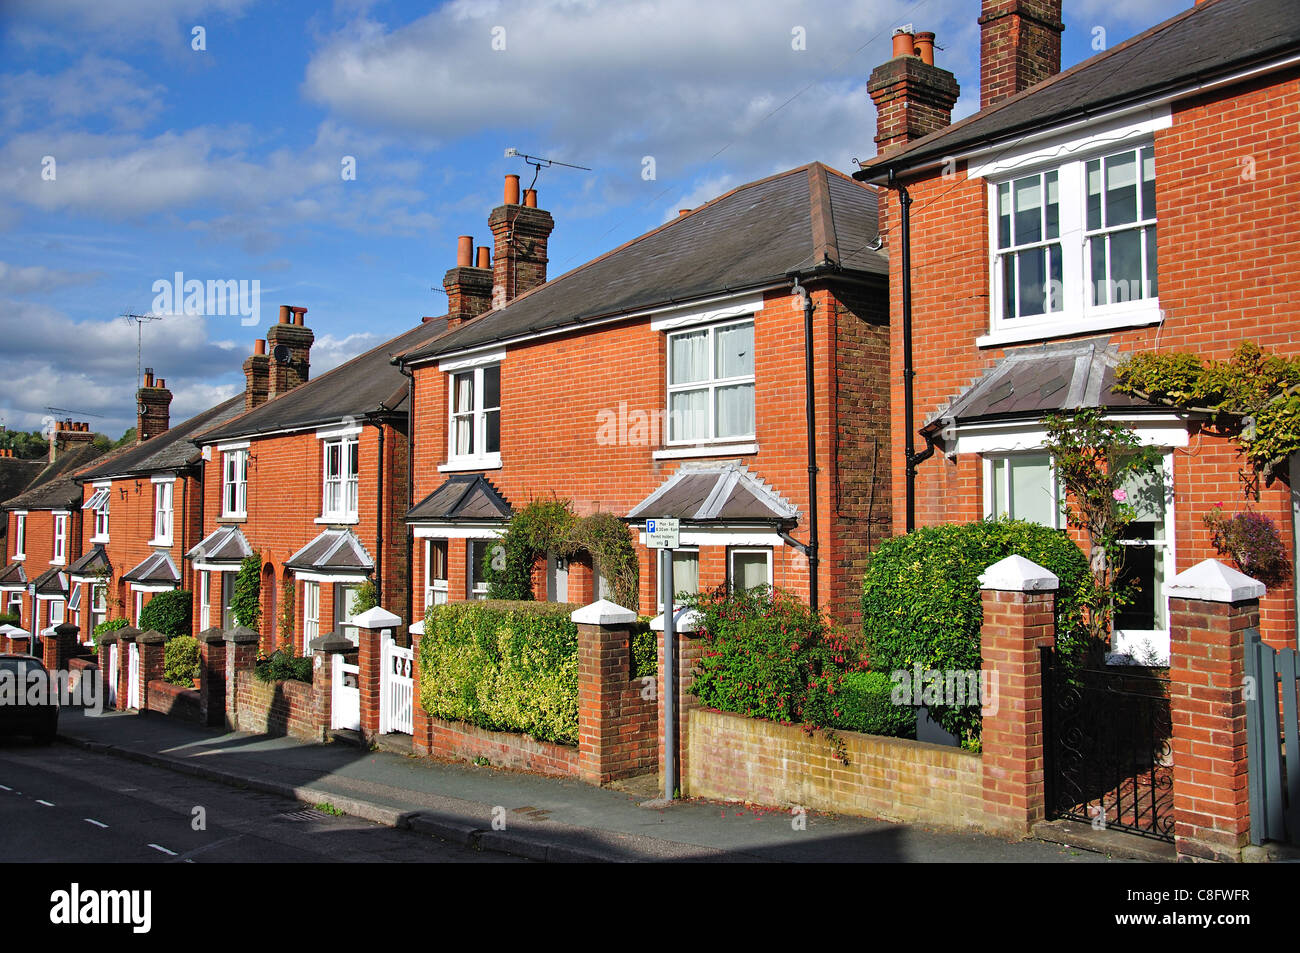 Semi-detached houses on Agraria Road, Guildford, Surrey, England, United Kingdom Stock Photo